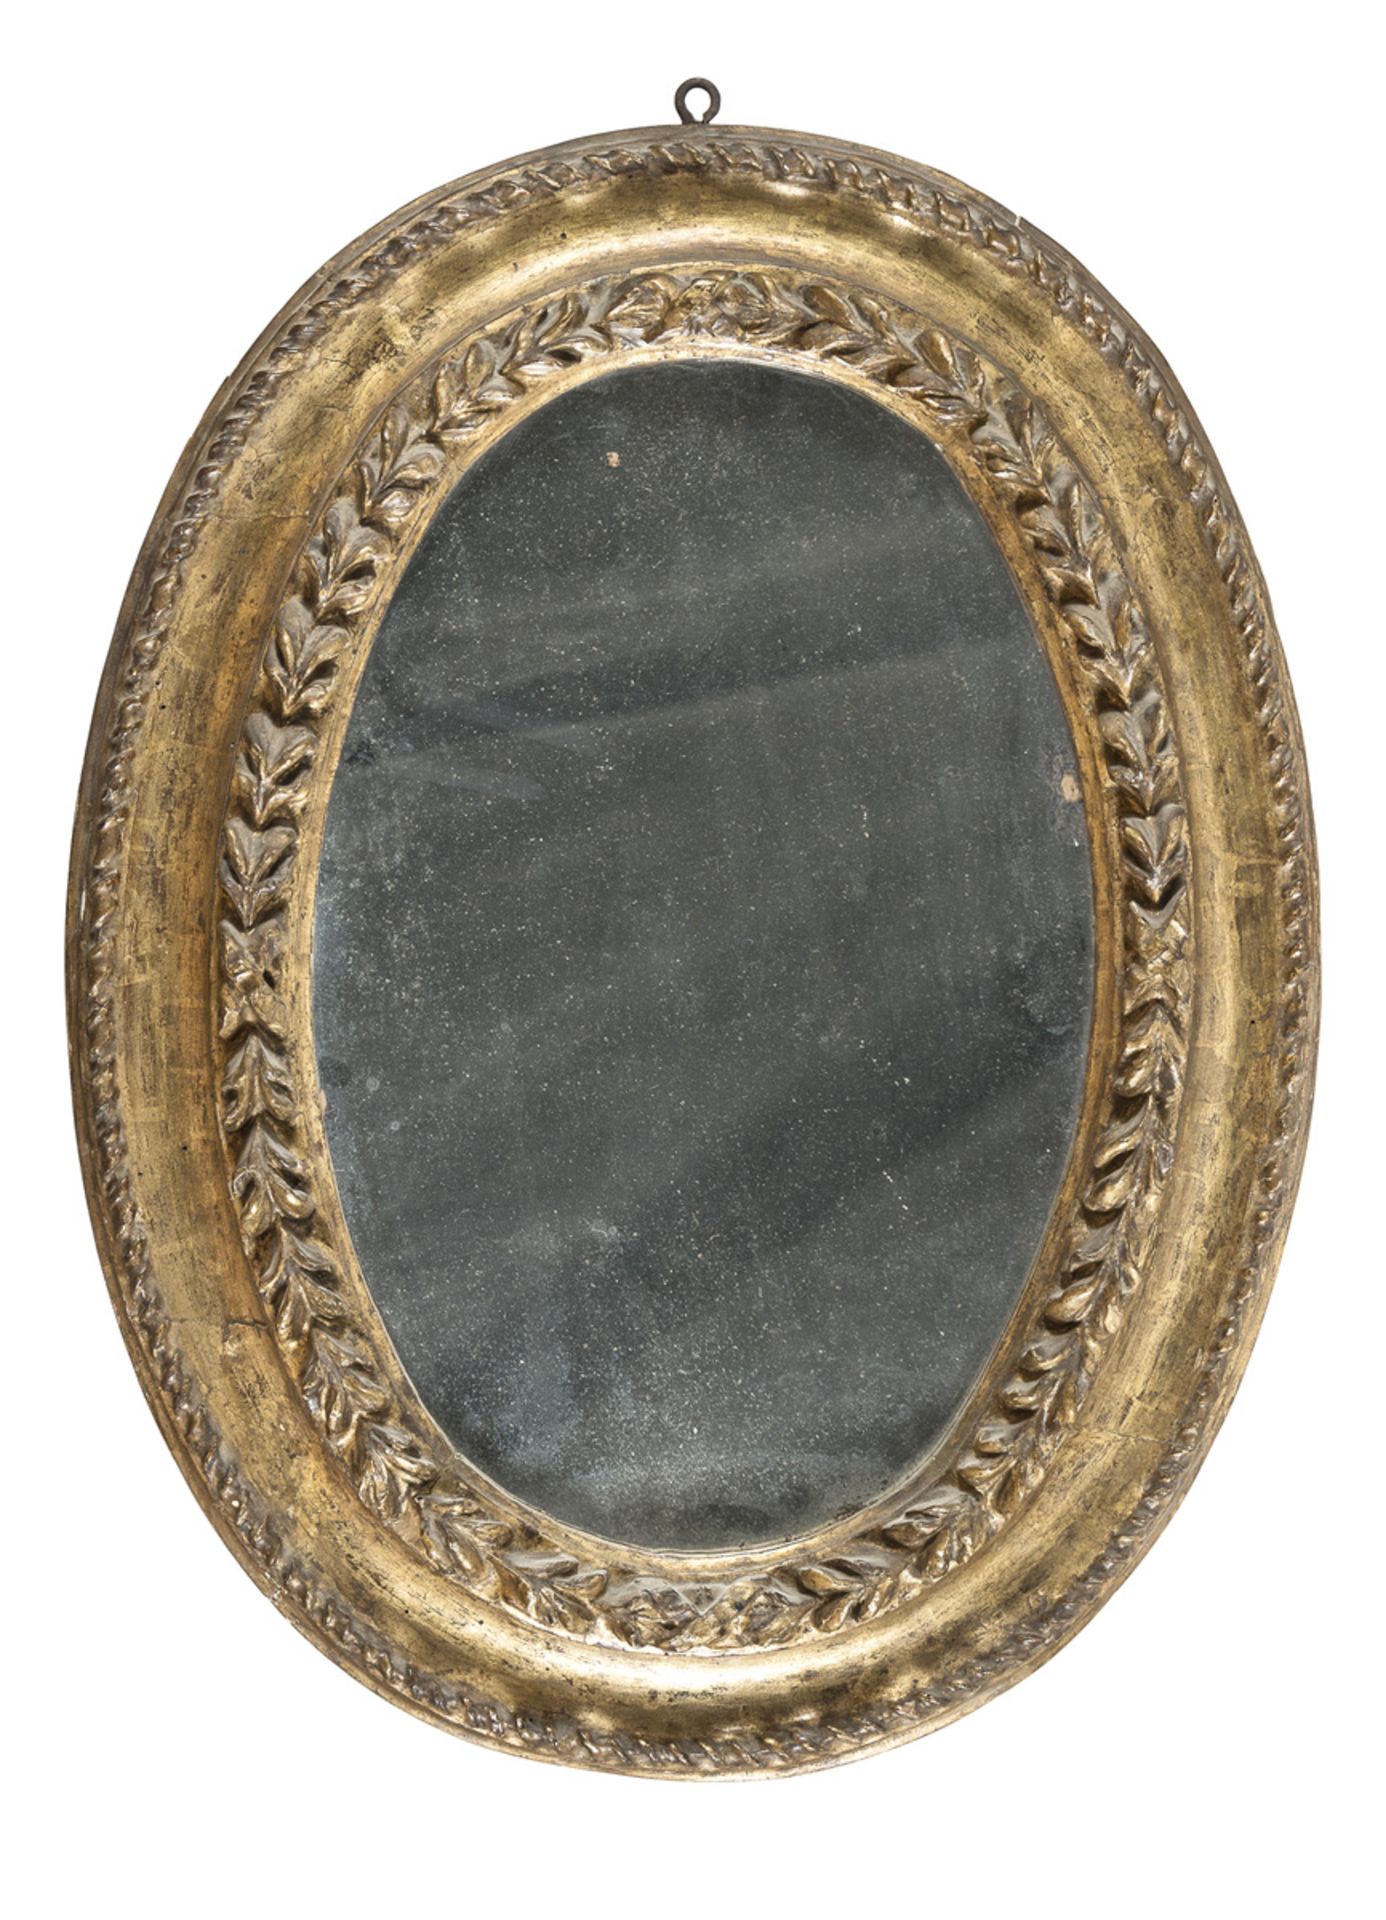 OVAL MIRROR IN GILTWOOD - LATE 18TH CENTURY